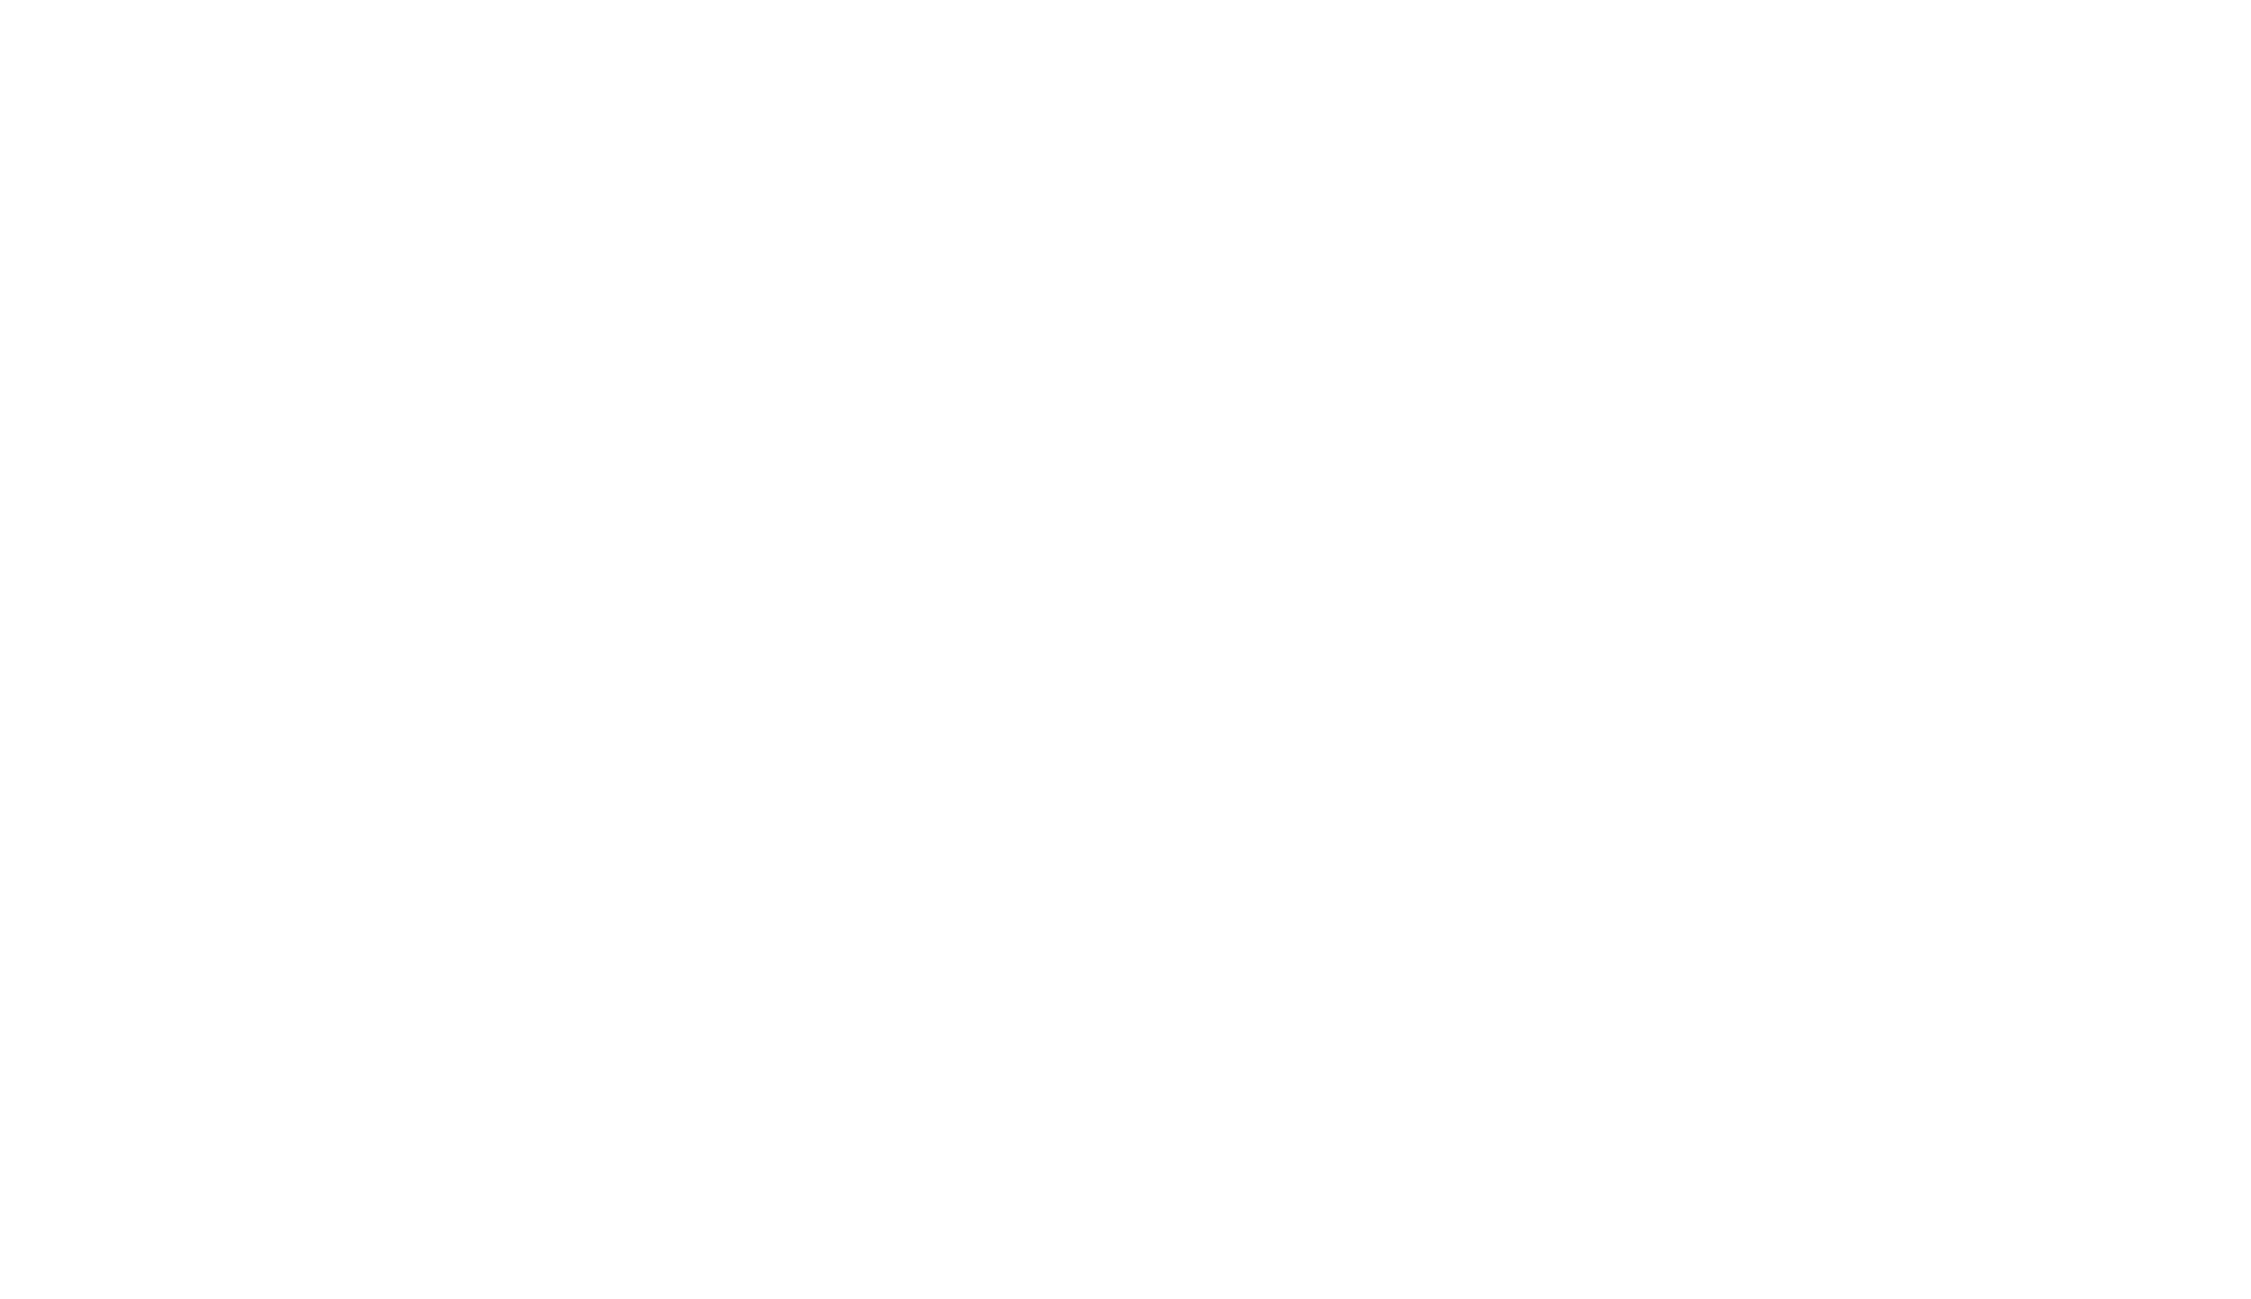 CDF_Primary-Logo_White.png